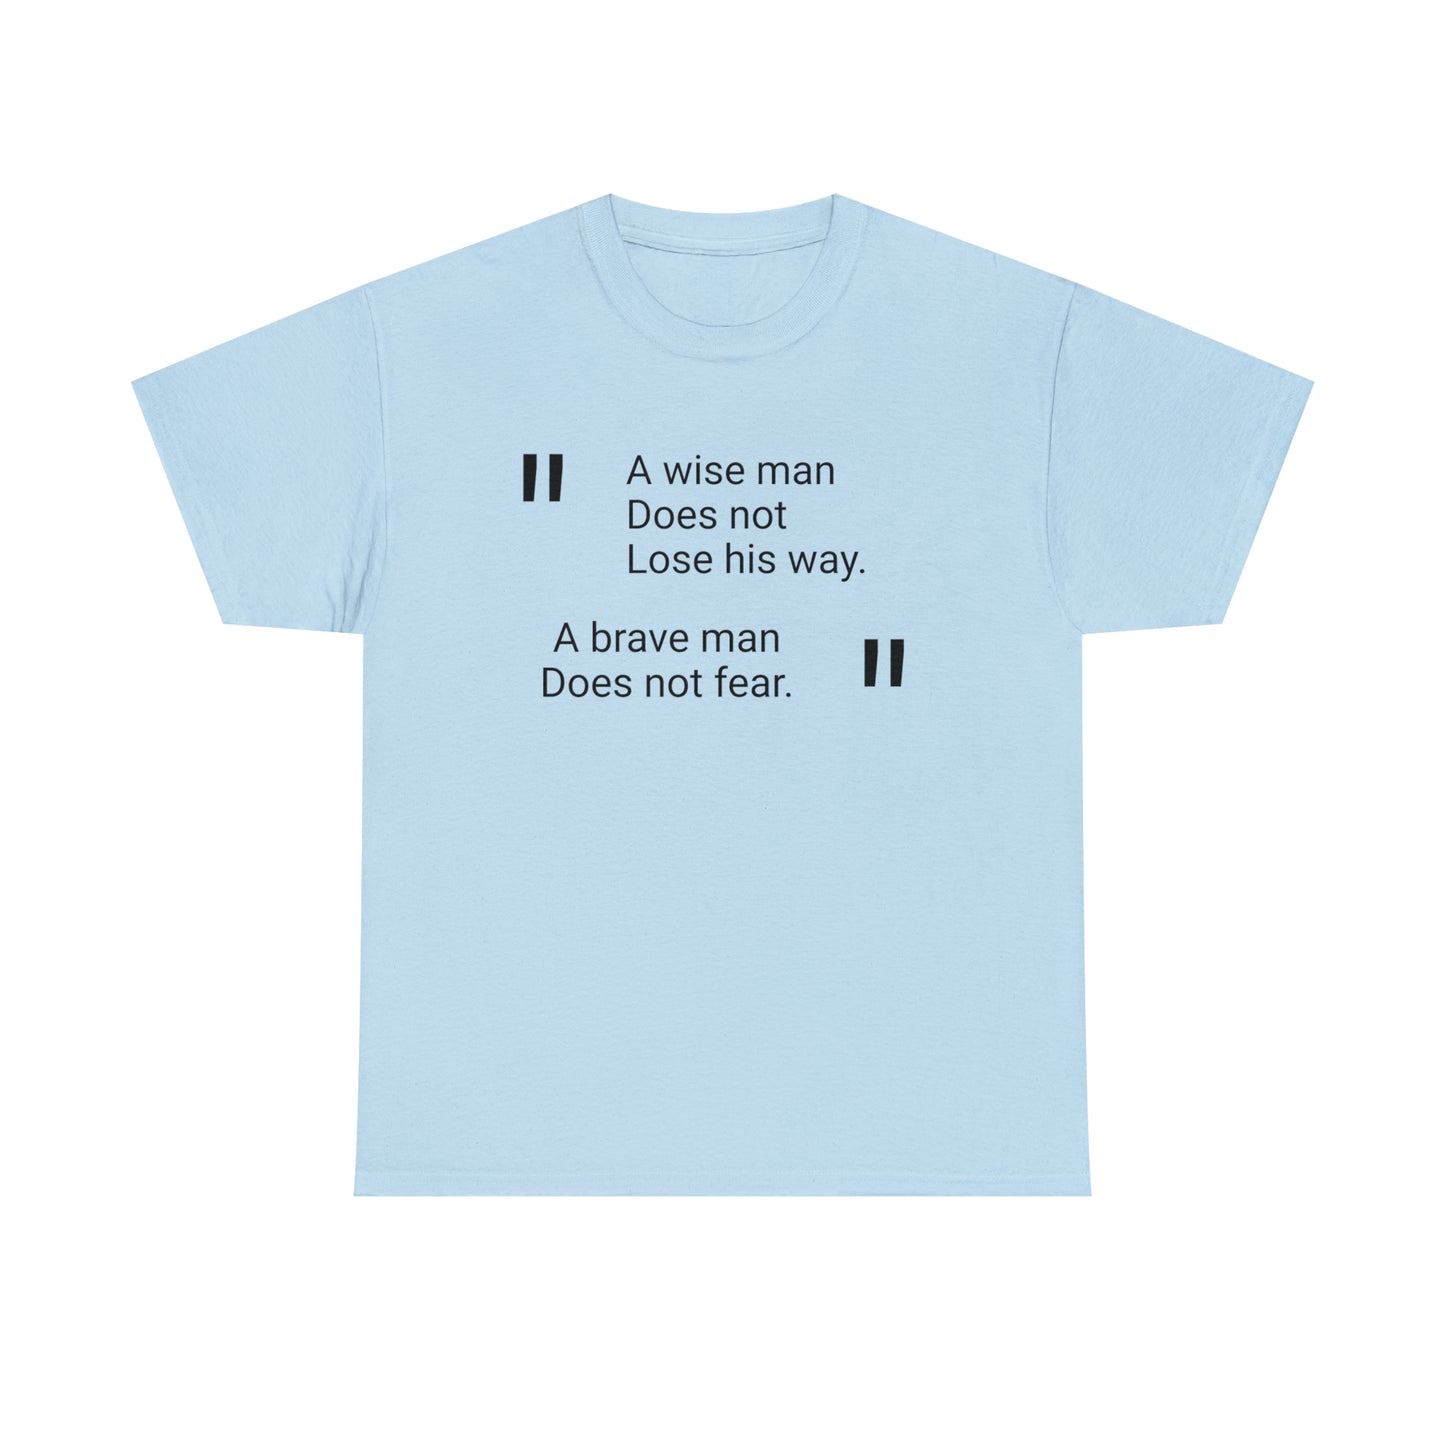 A Wise Man Does Not Lose His Way. A Brave Man Does Not Fear. T-Shirt